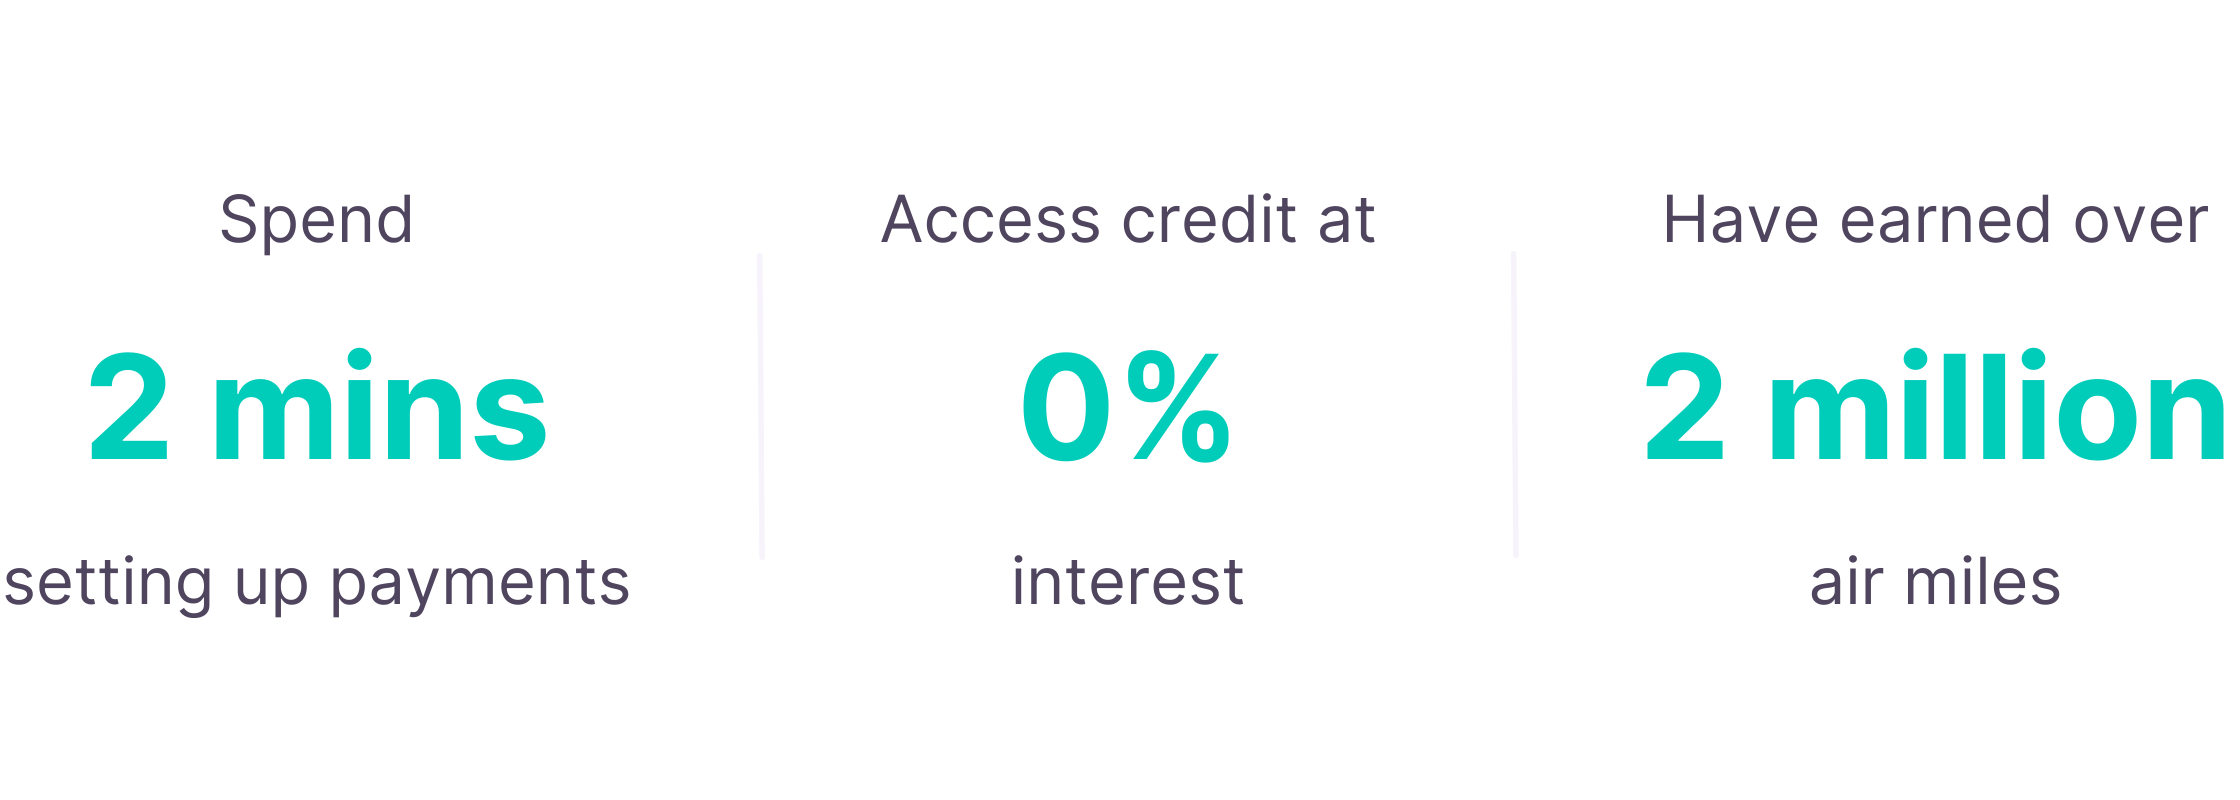 Since using CardUp, Crowd spend 2 mins setting up payments, access credit at 0% interest and have earned over 2 million air miles